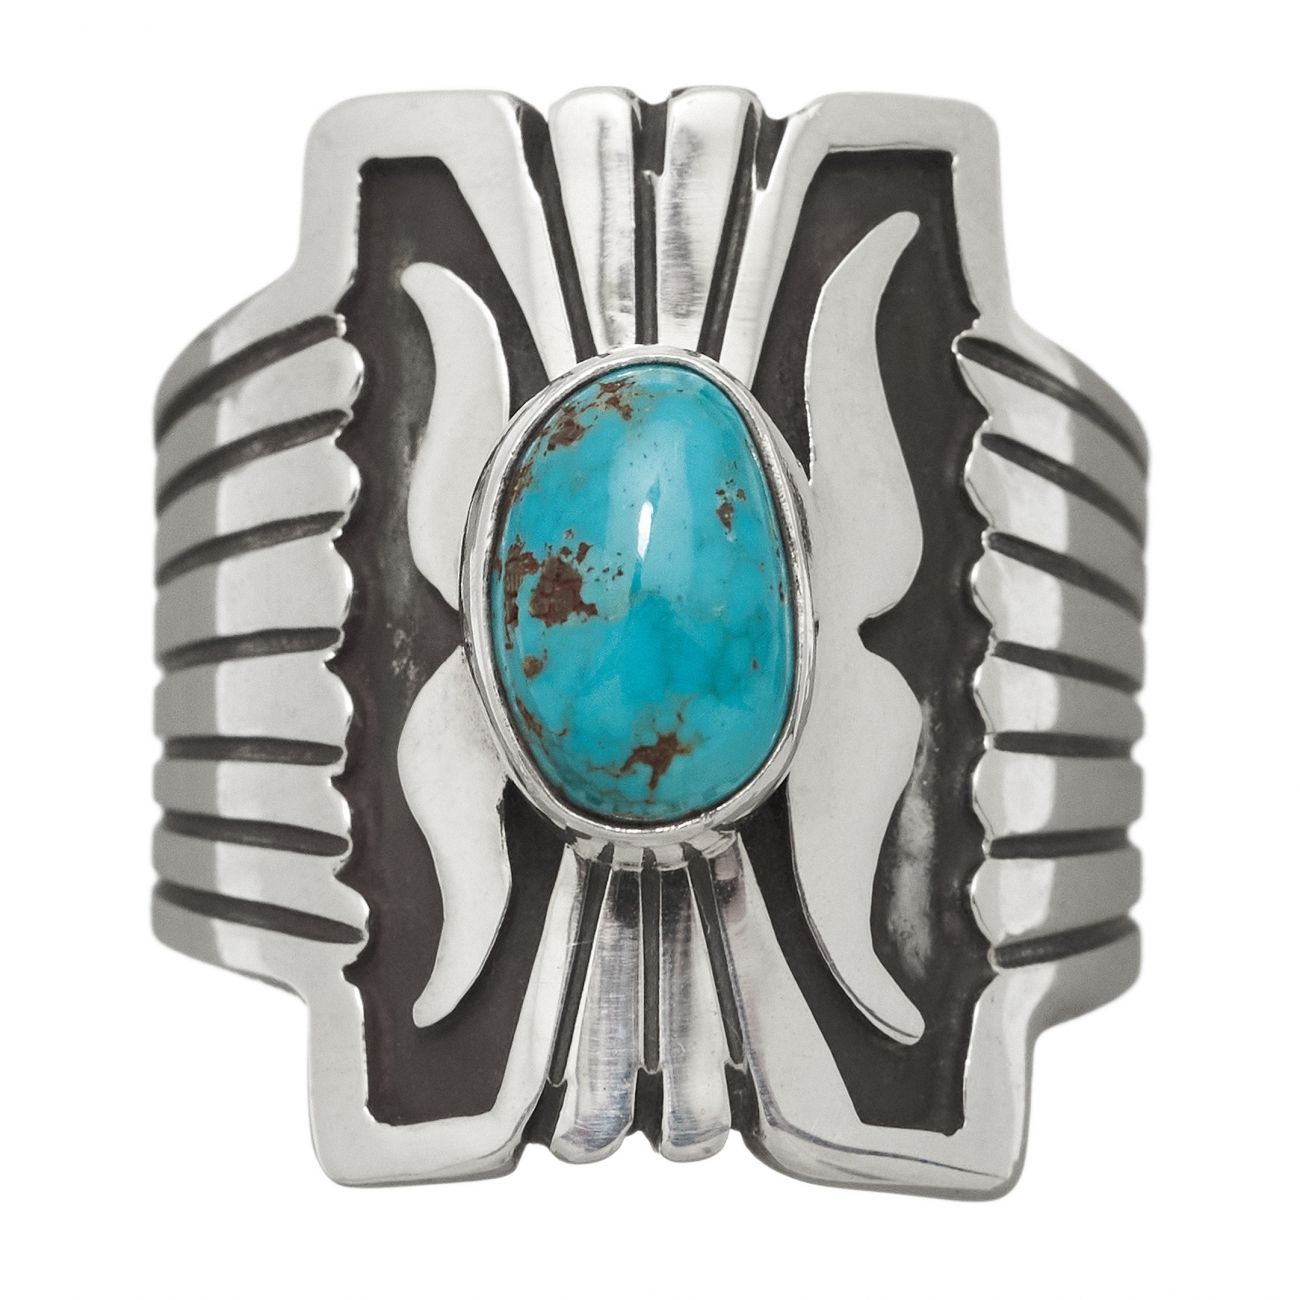 Navajo ring for men BA1123 in turquoise and silver - Harpo Paris